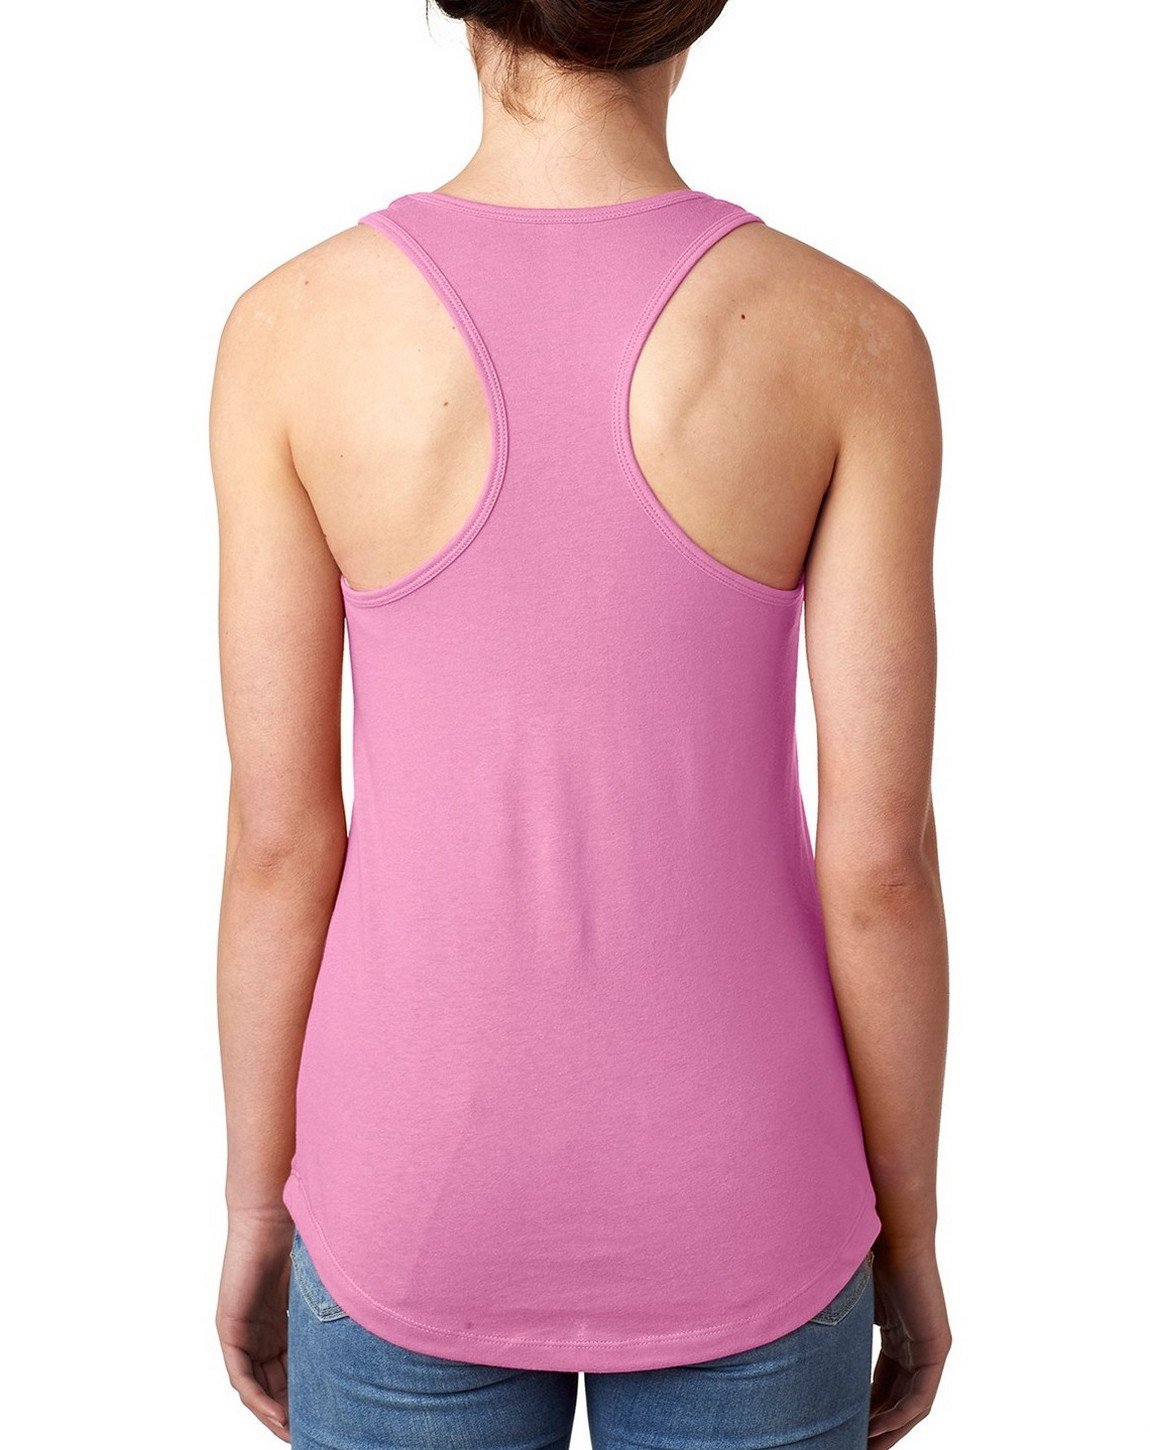 Next Level Ideal Racerback Tank Lilac Large (Pack of 5)